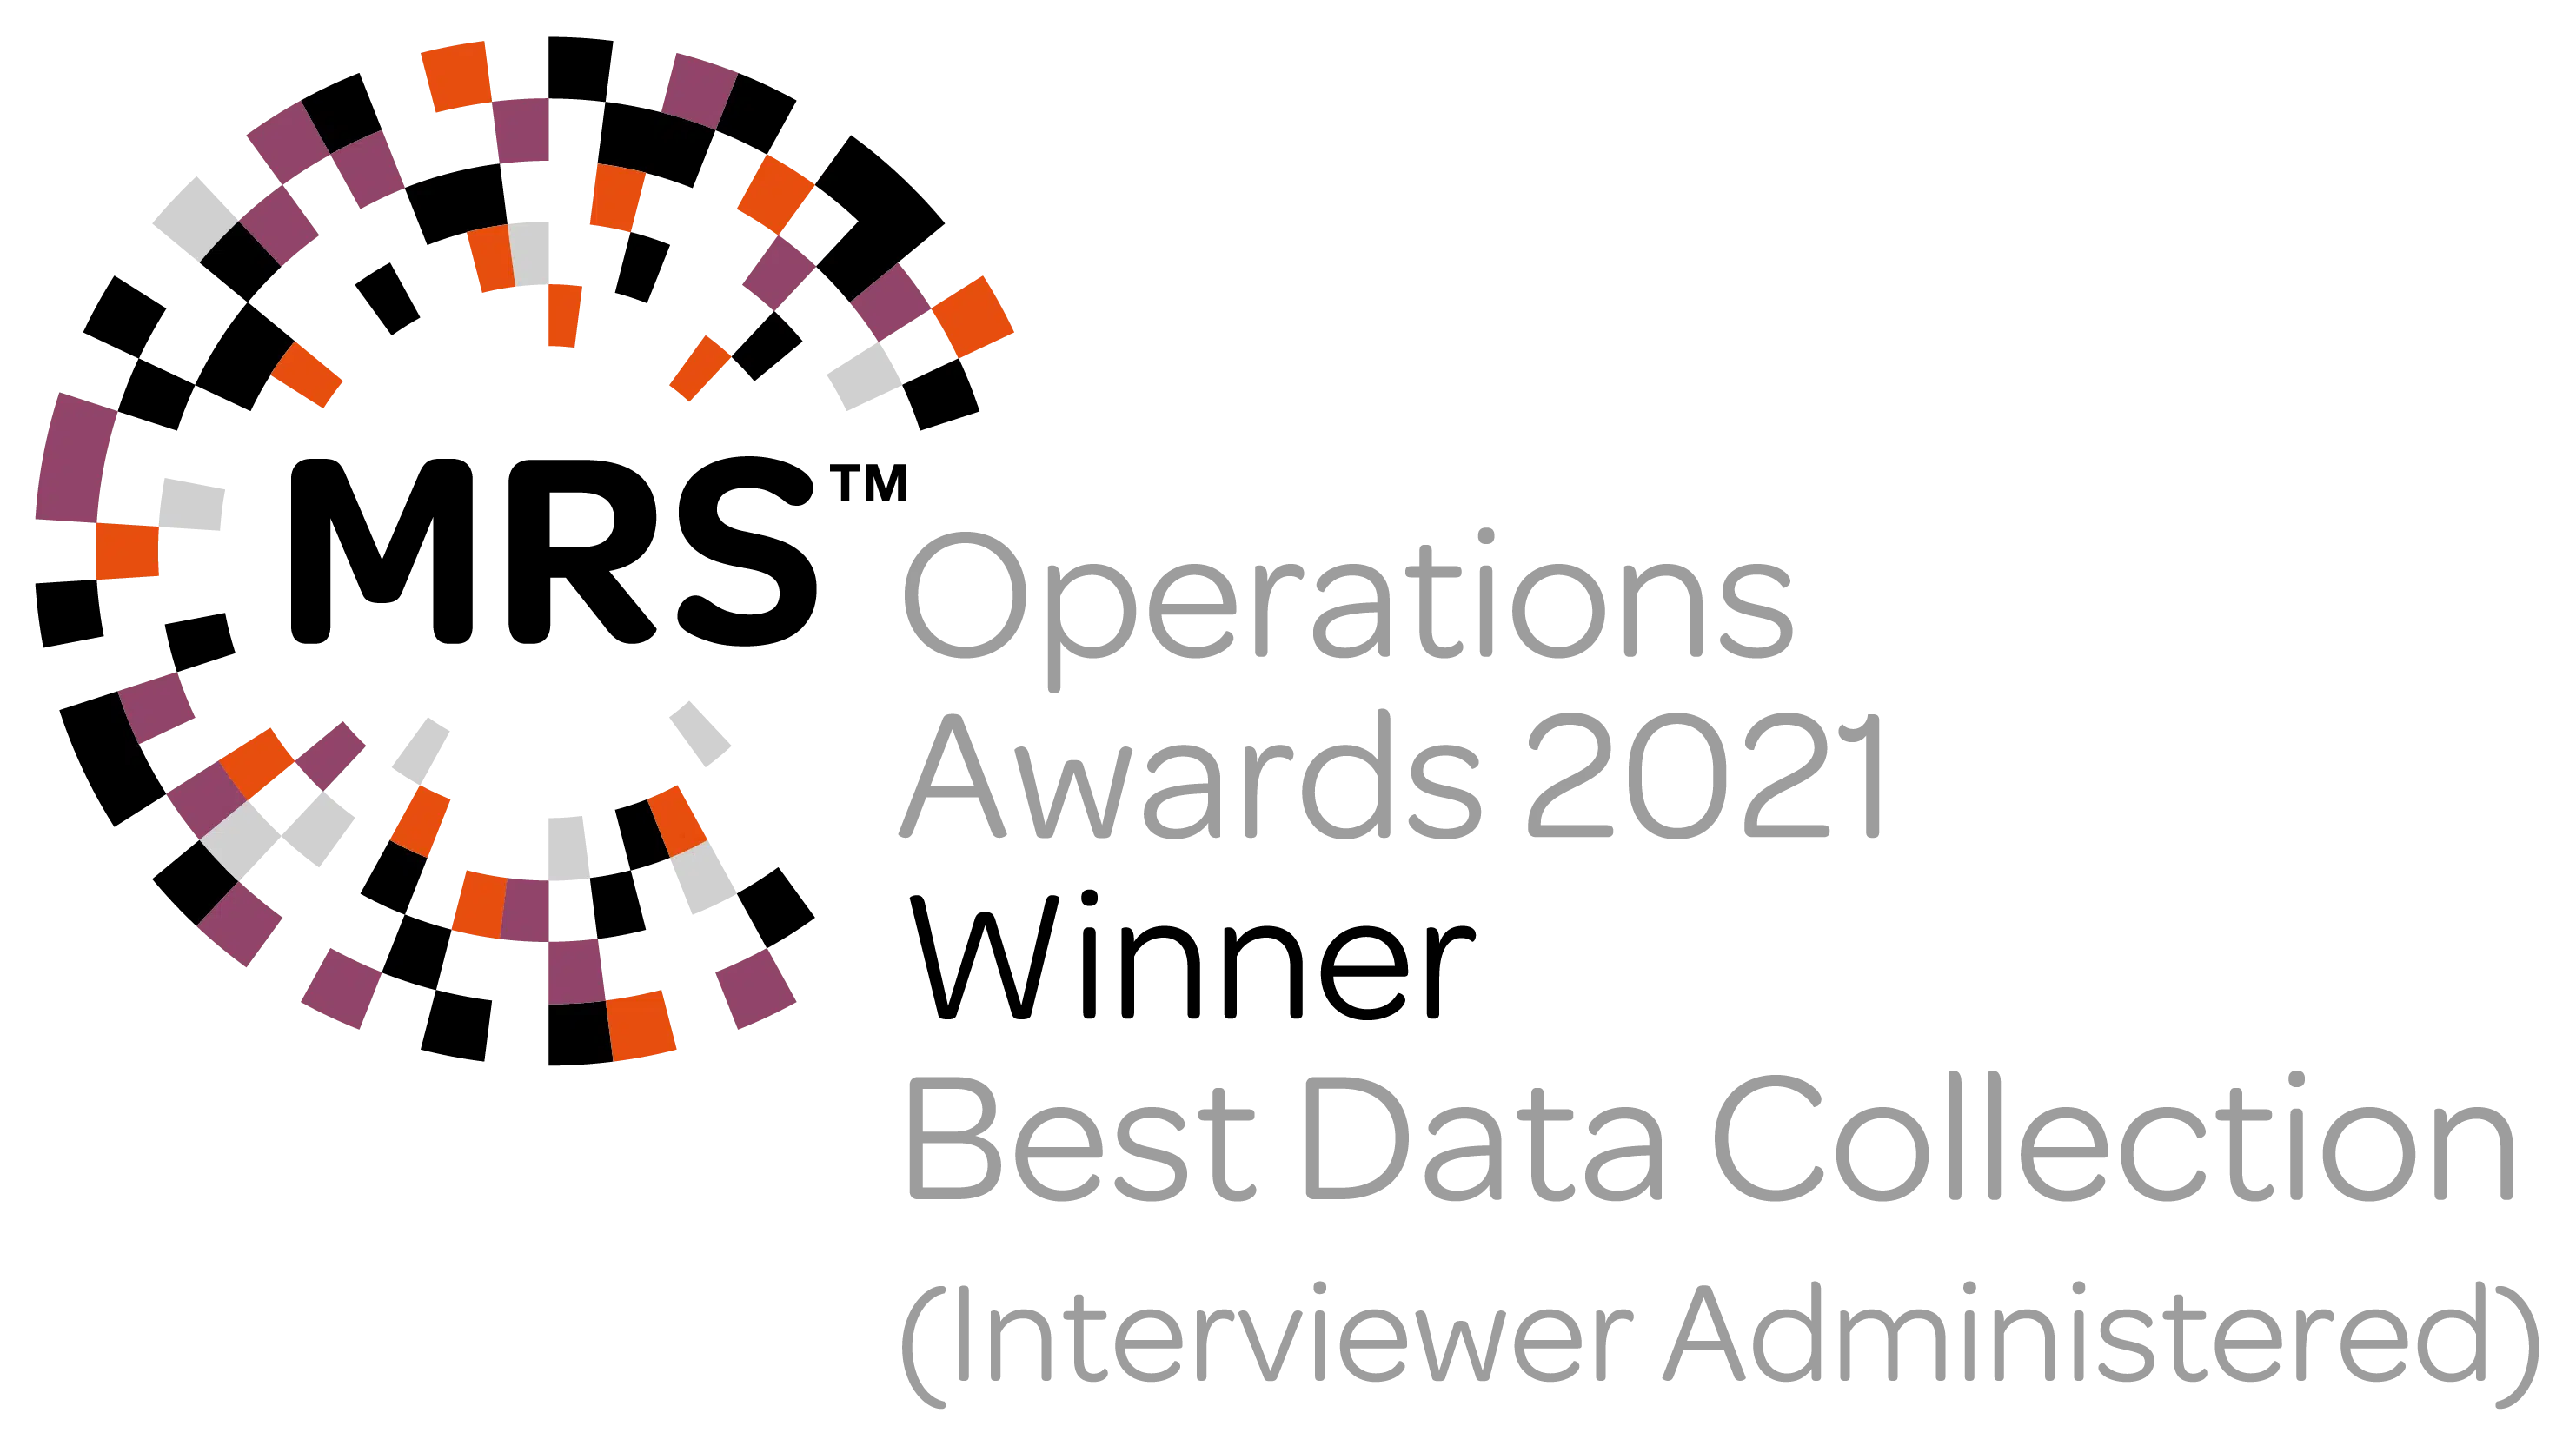 MRS Operations Awards 2021 Winner - Best Data Collection (Interviewer Administered)